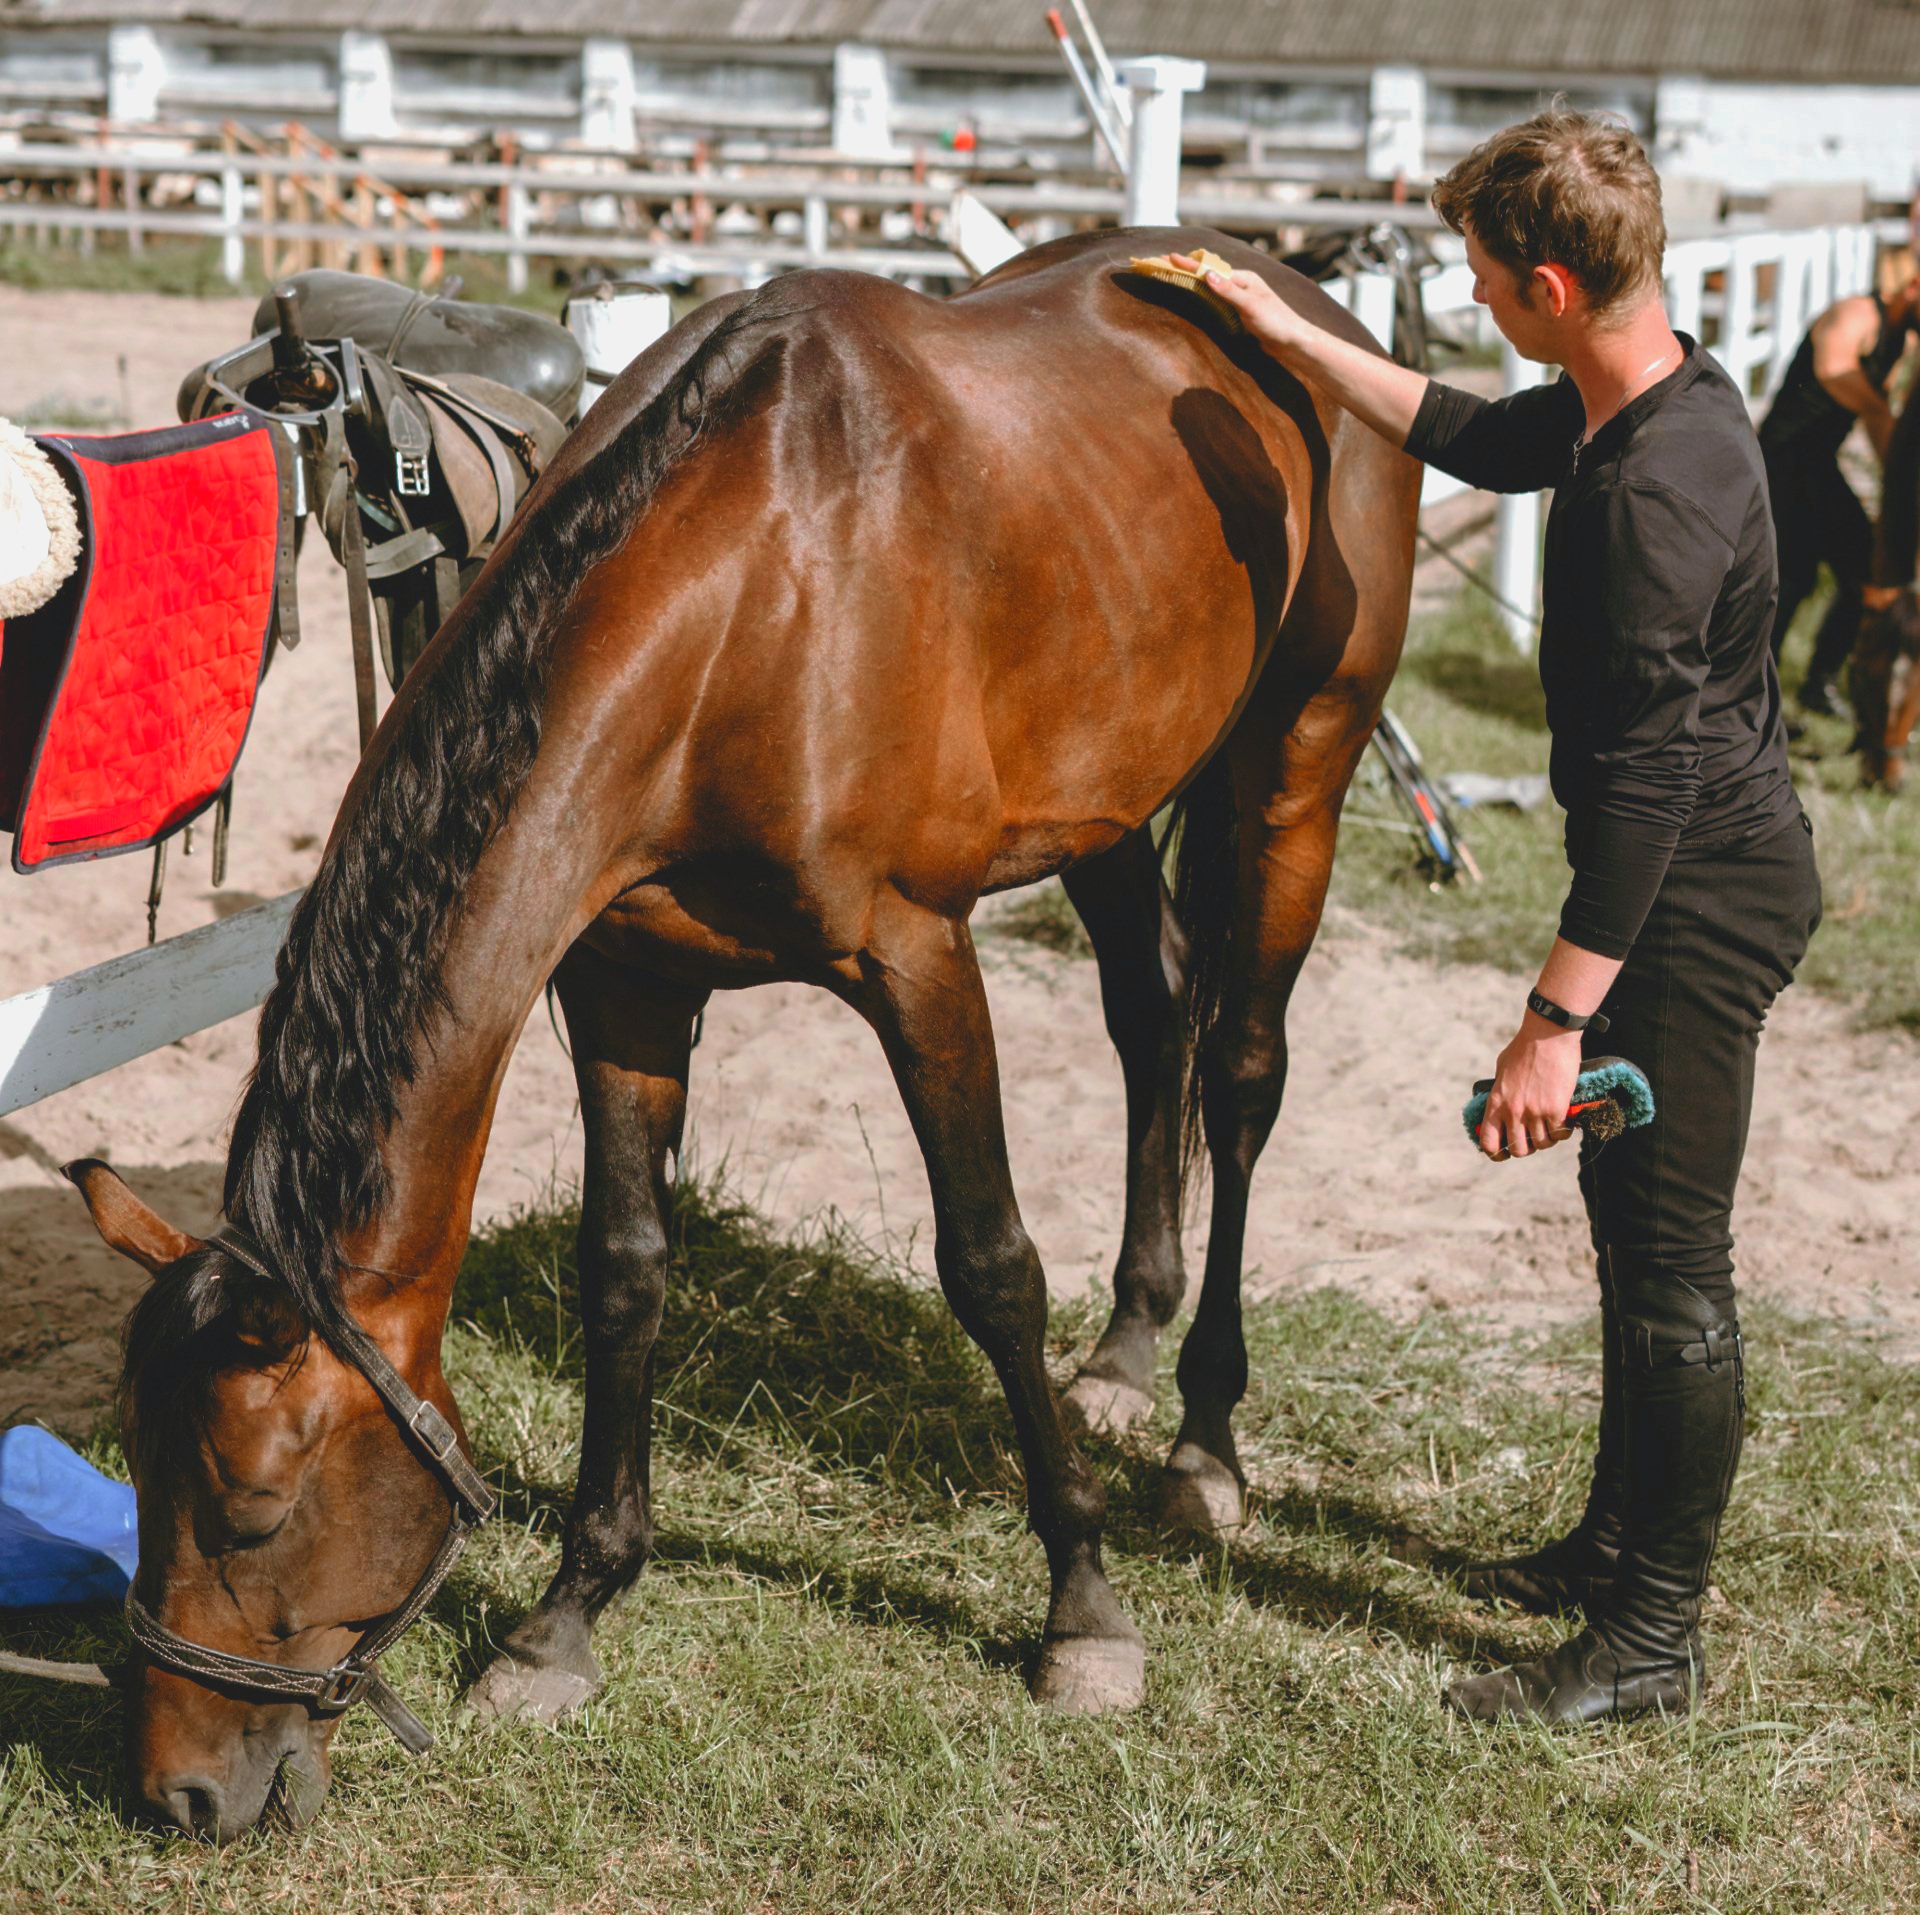 Flight assistance made it possible for a Veteran to participate in equine therapy.